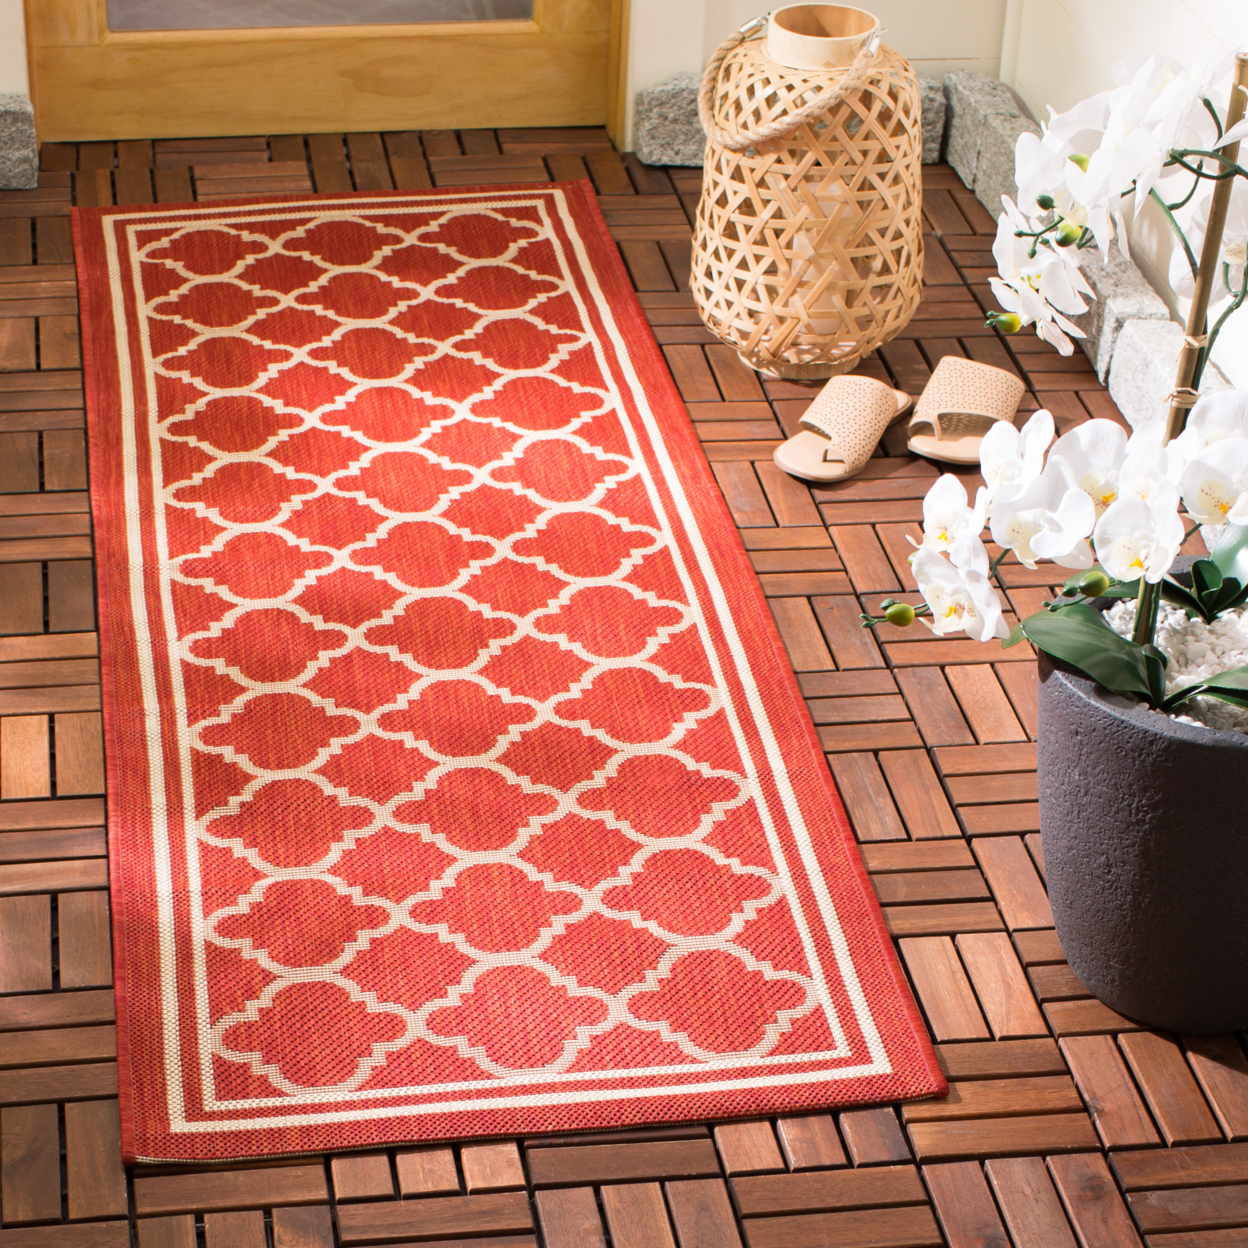 SAFAVIEH Outdoor CY6918-248 Courtyard Collection Red / Bone Rug - 8' X 11'